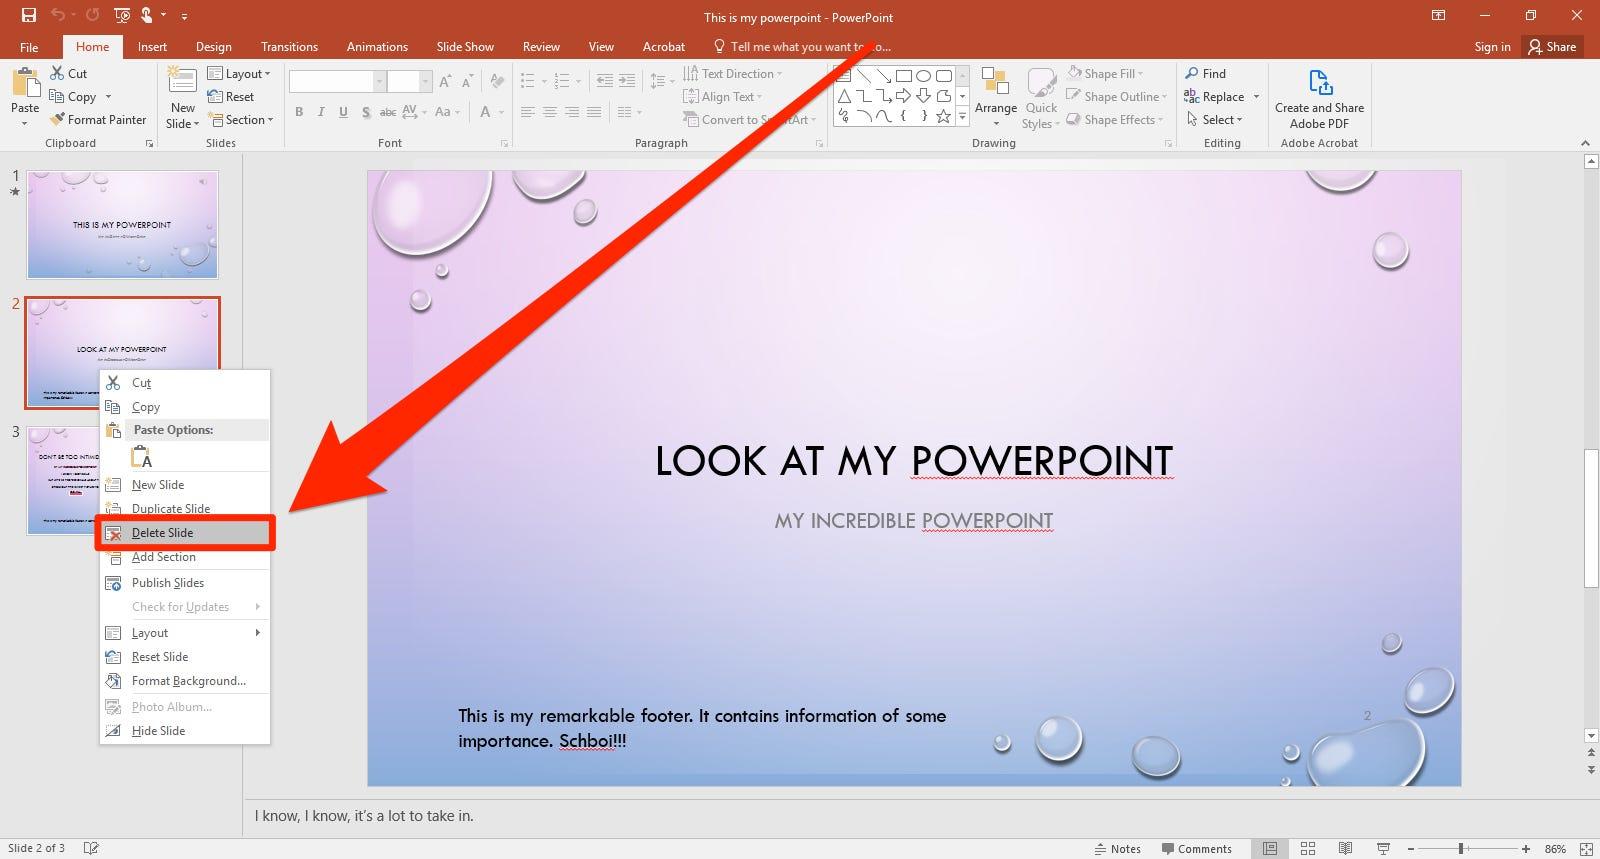 How to delete a slide in your PowerPoint presentation or delete an